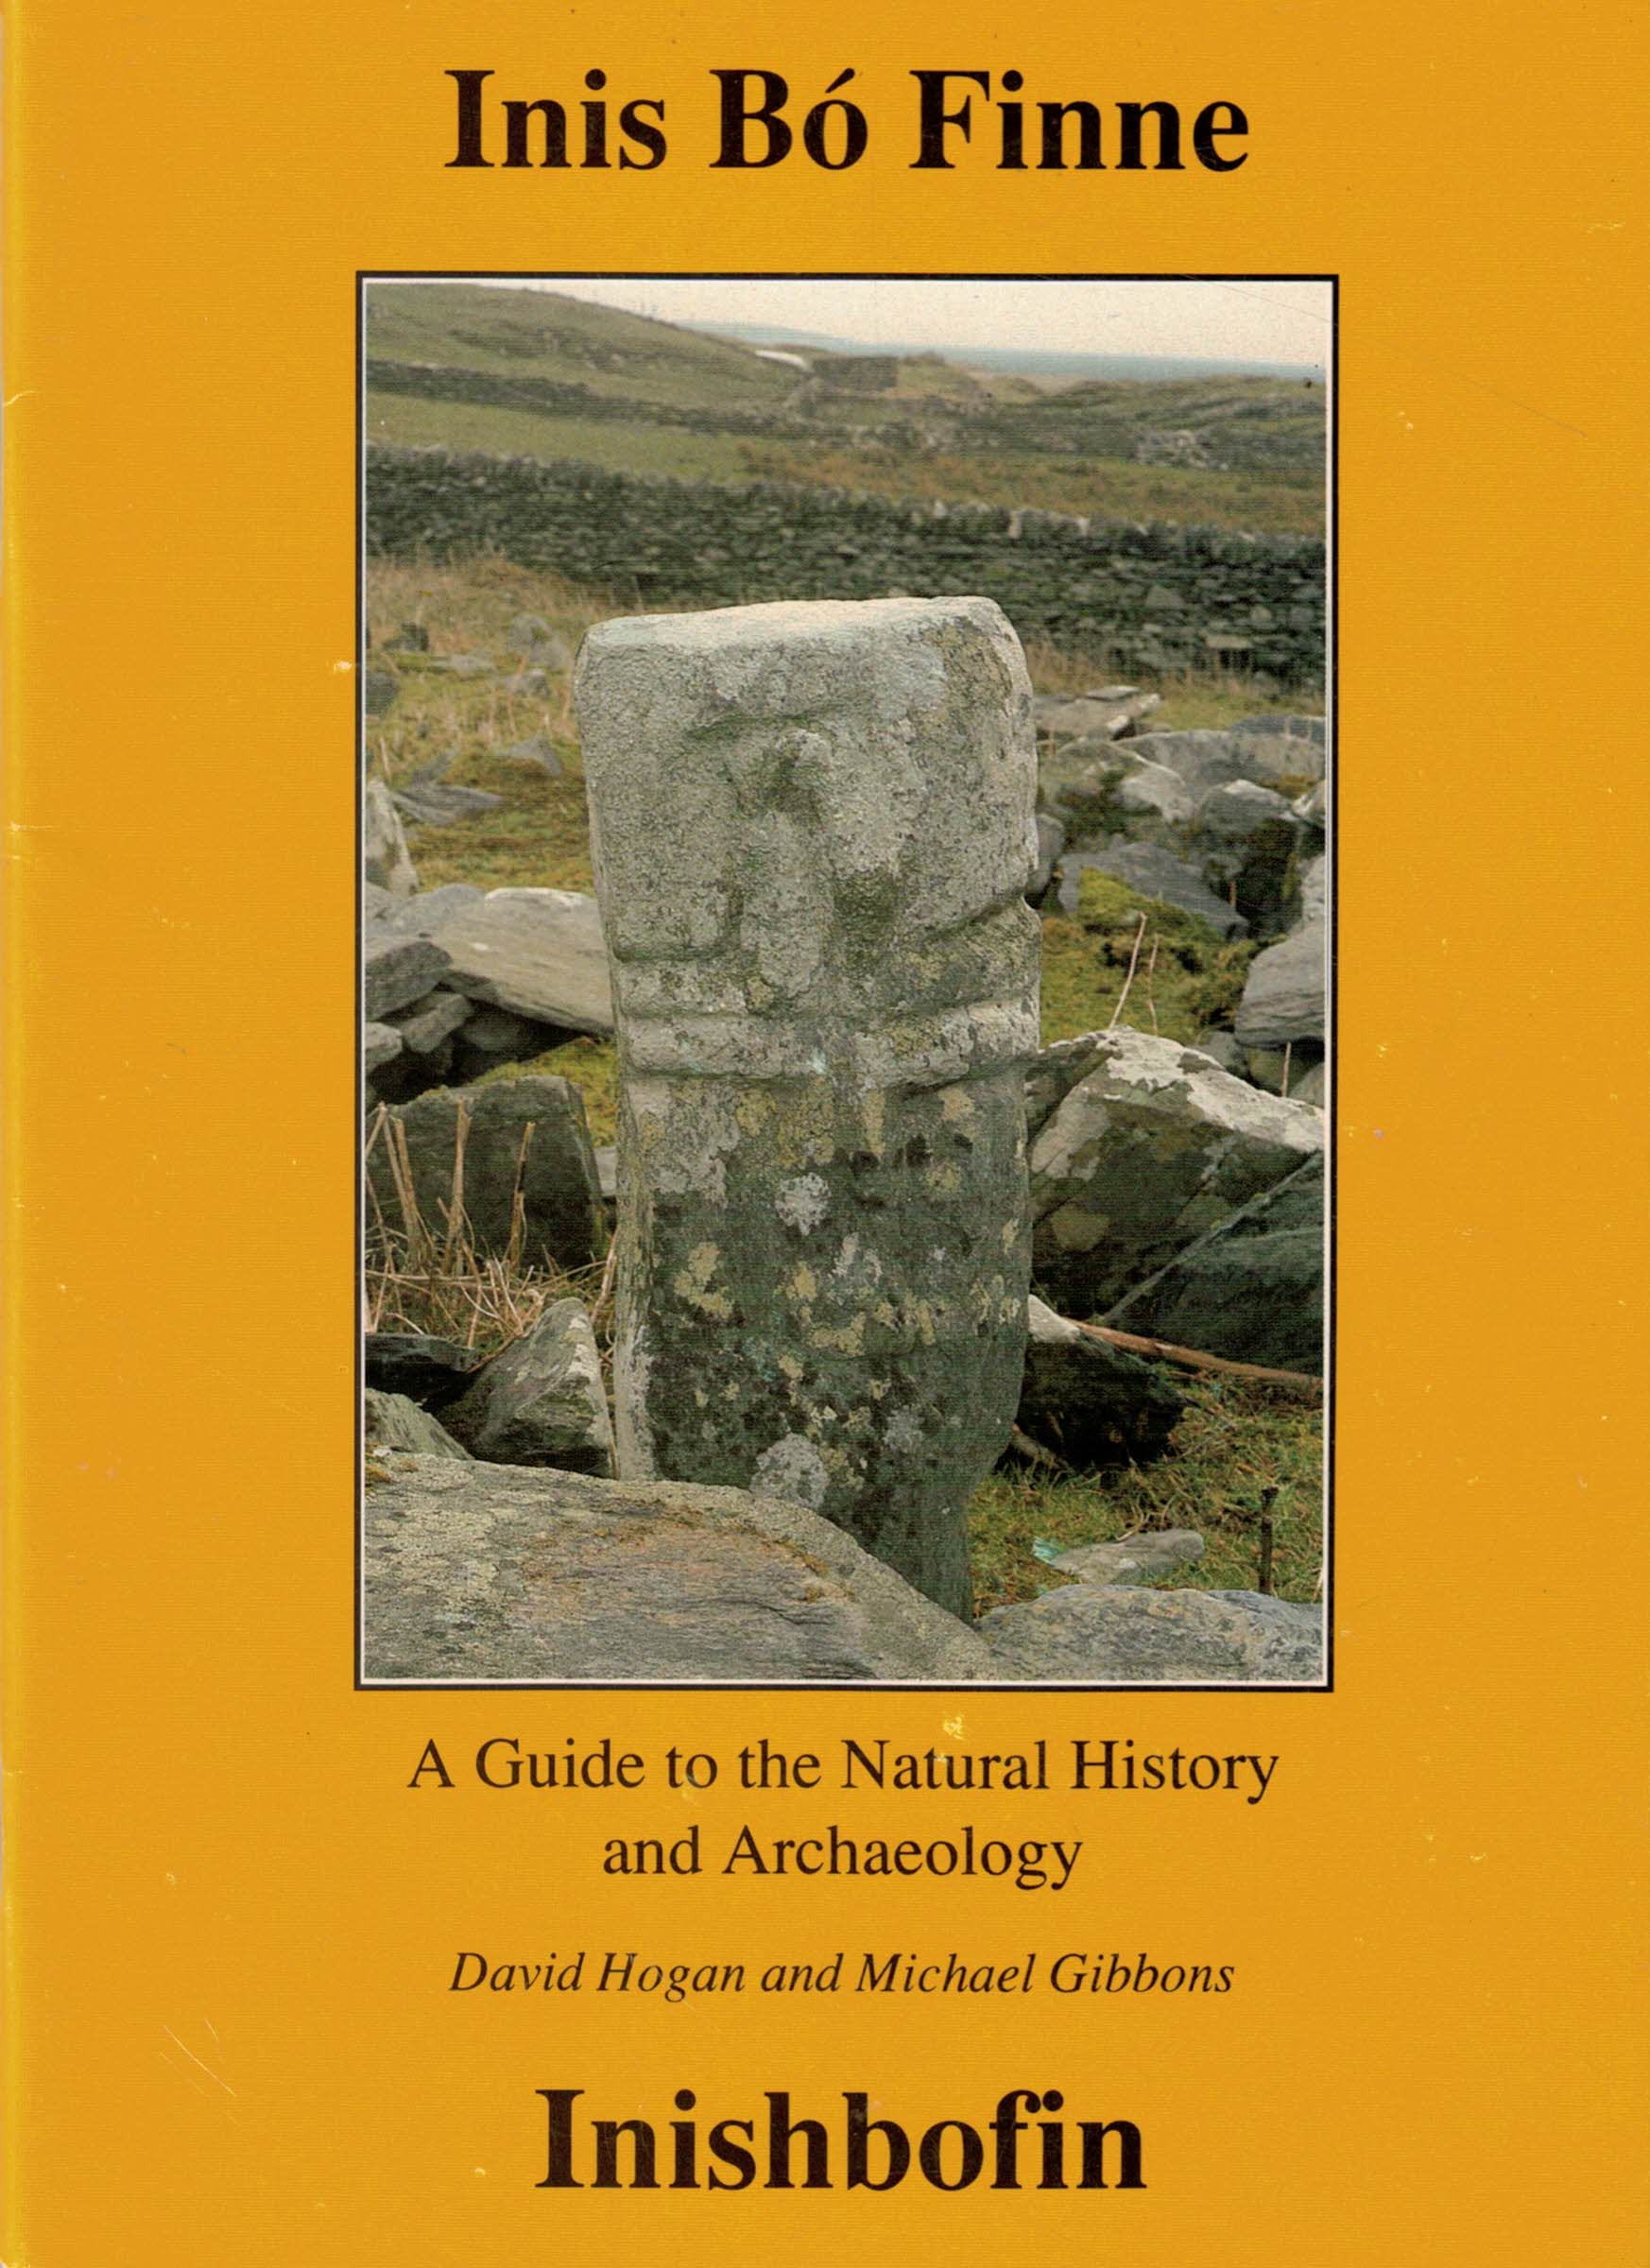 Inis Bó Finne. A Guide to the Natural History and Archaeology.